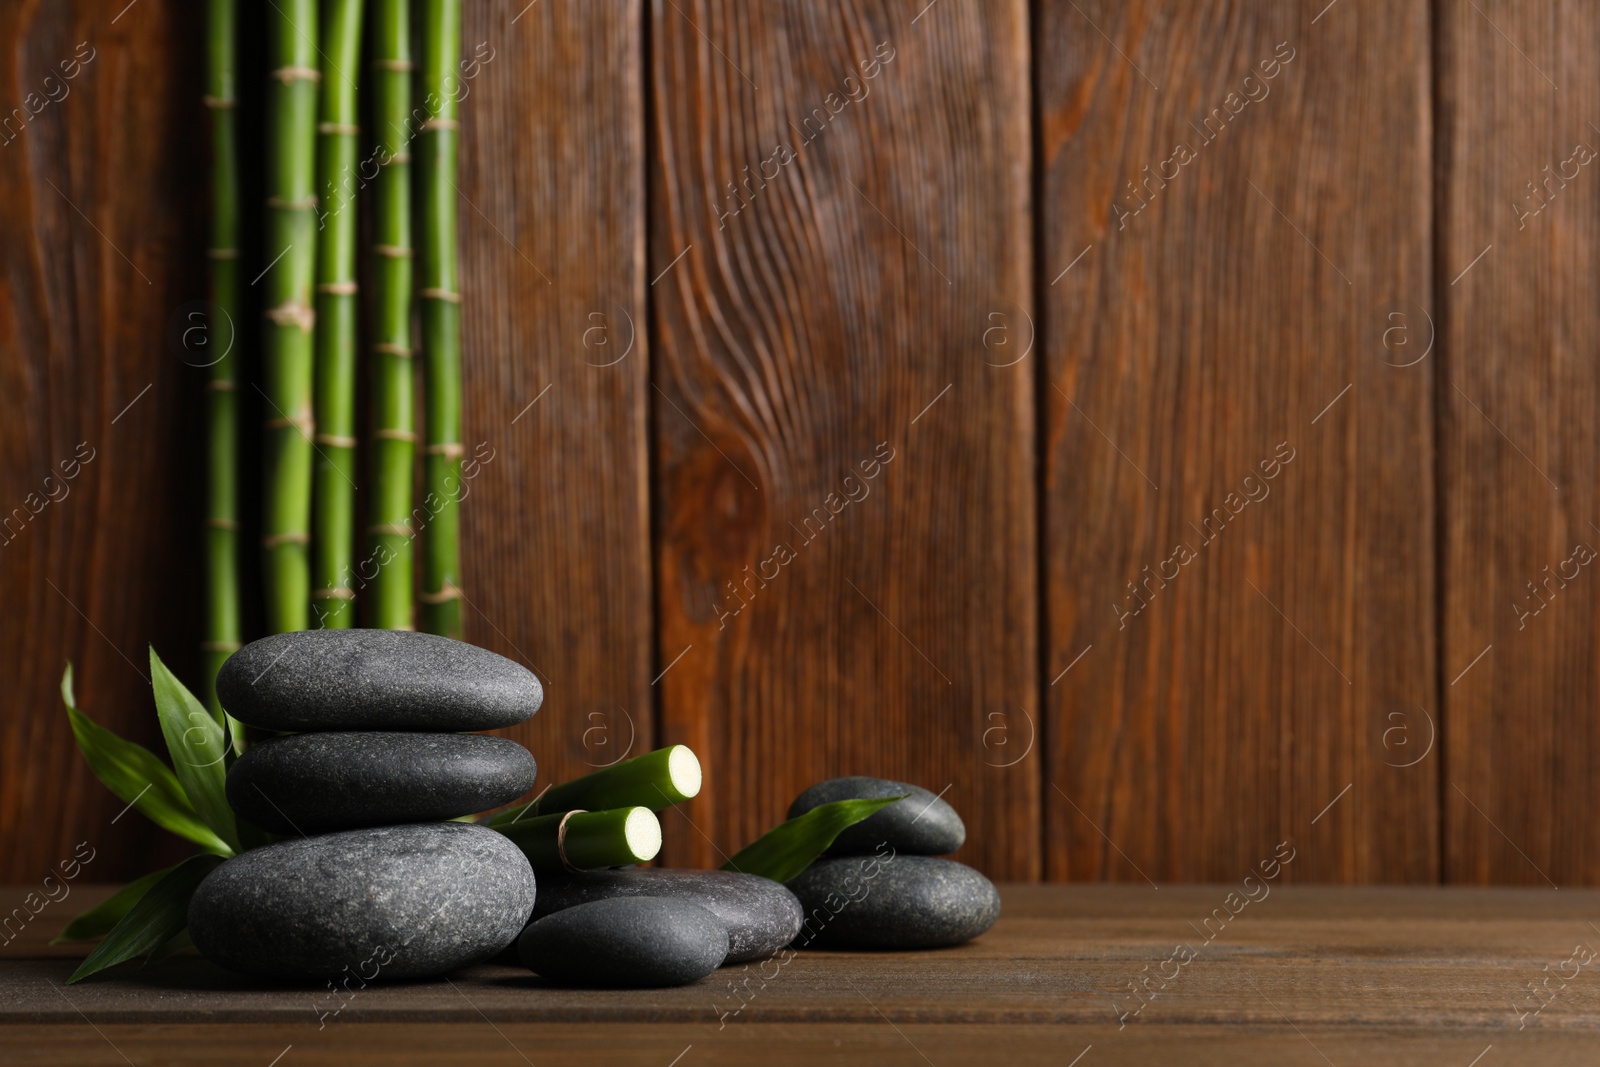 Photo of Spa stones and bamboo stems on wooden table. Space for text